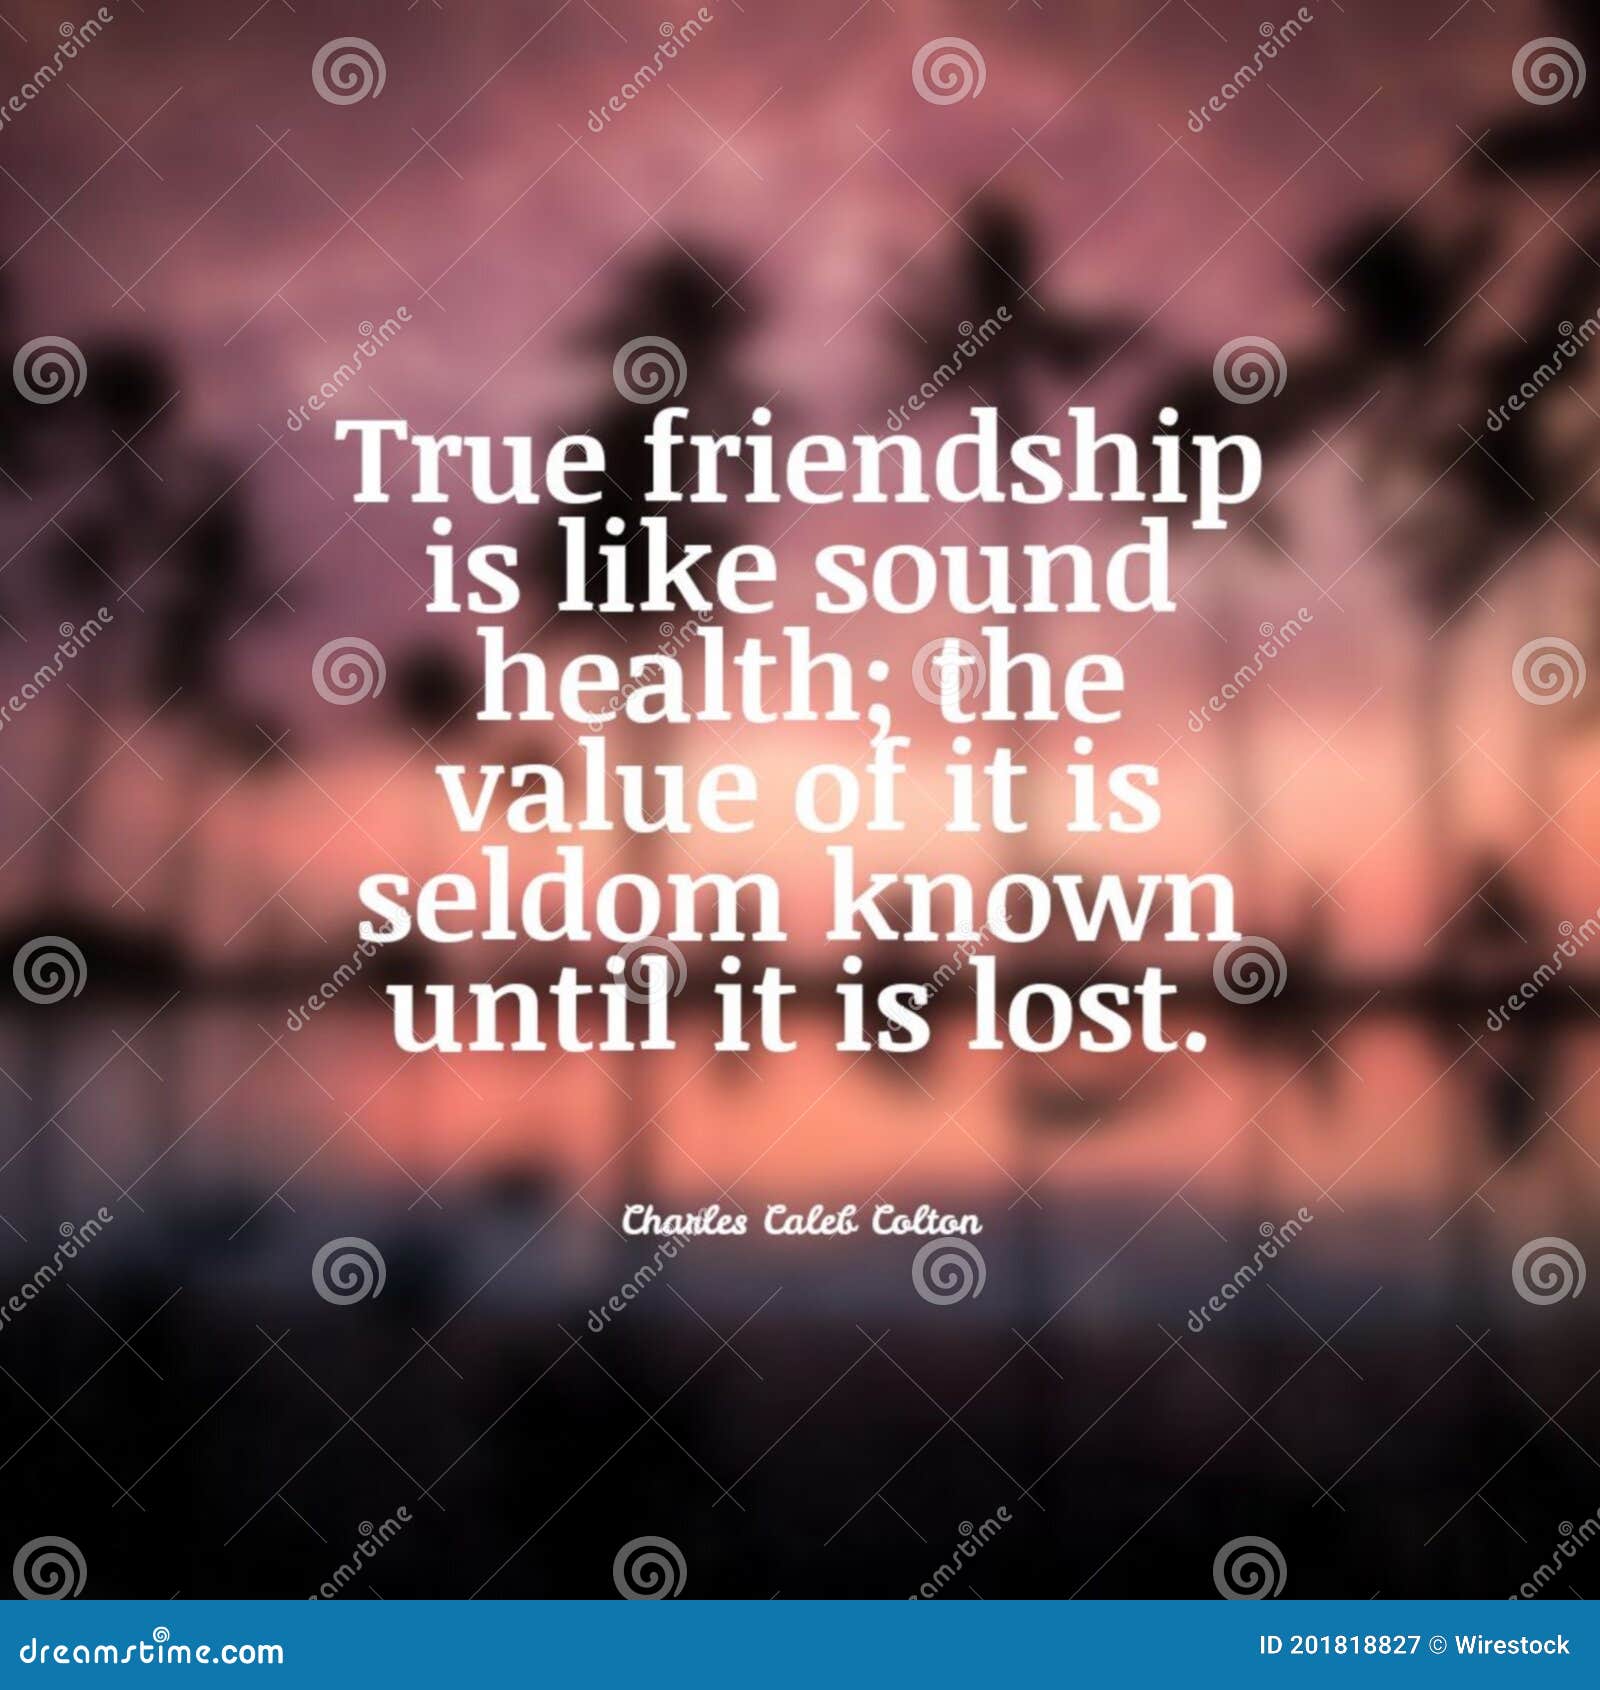 the value of true friendship